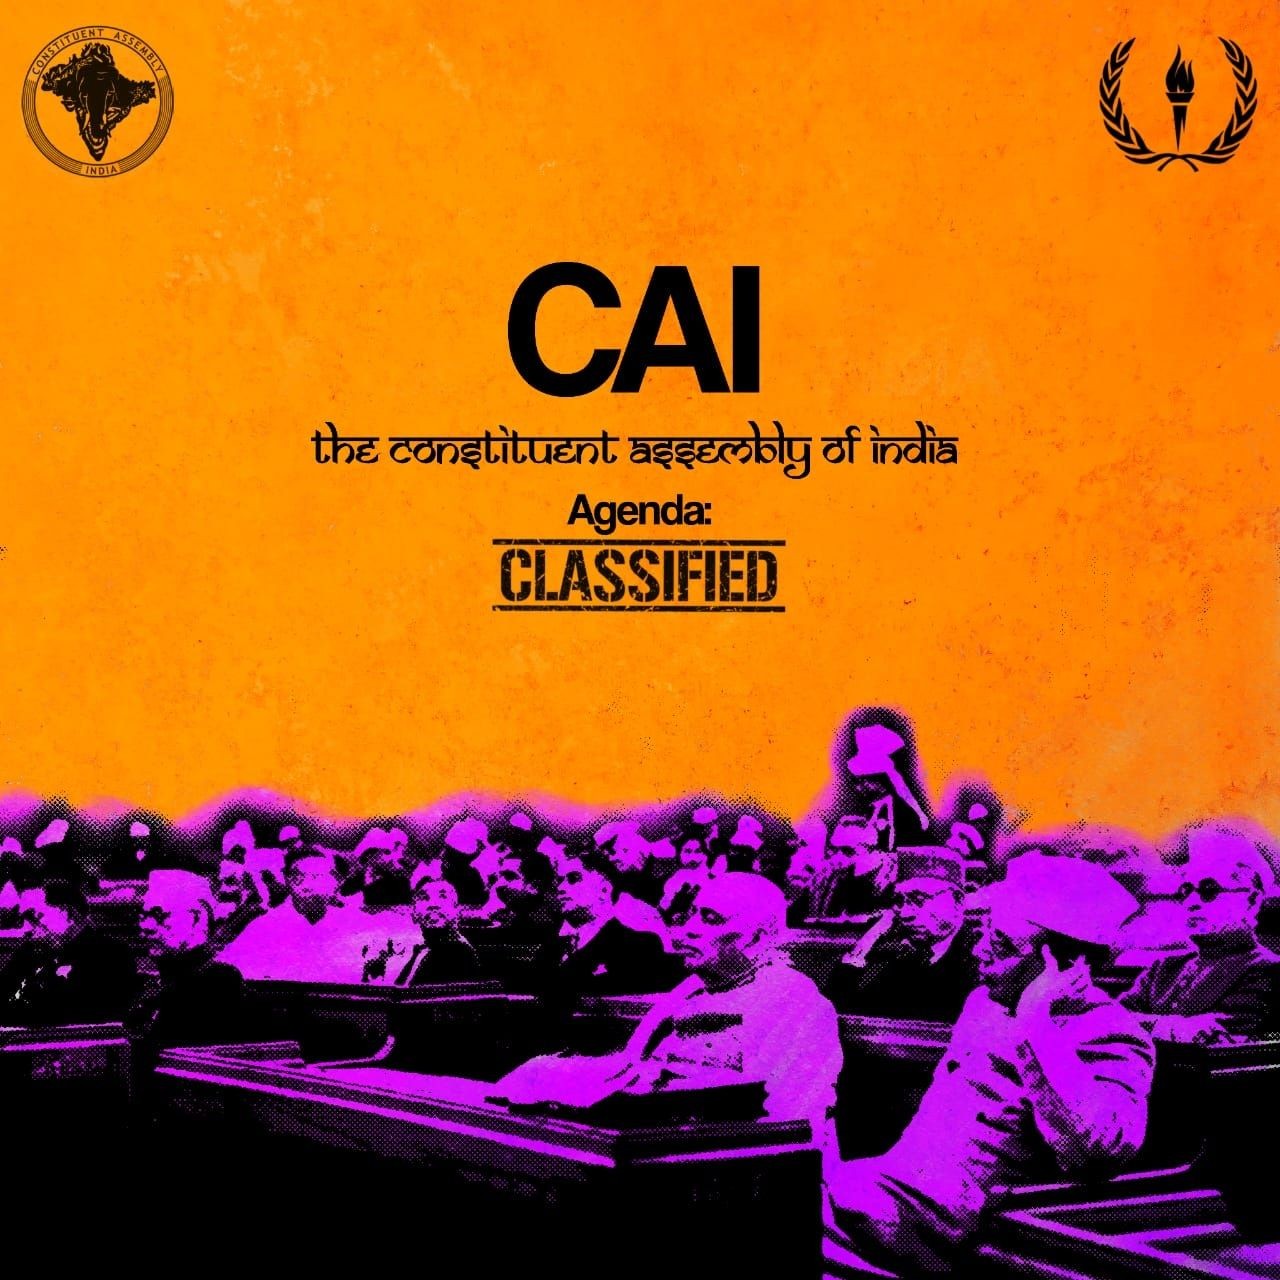 The Constituent Assembly of India (CAI)